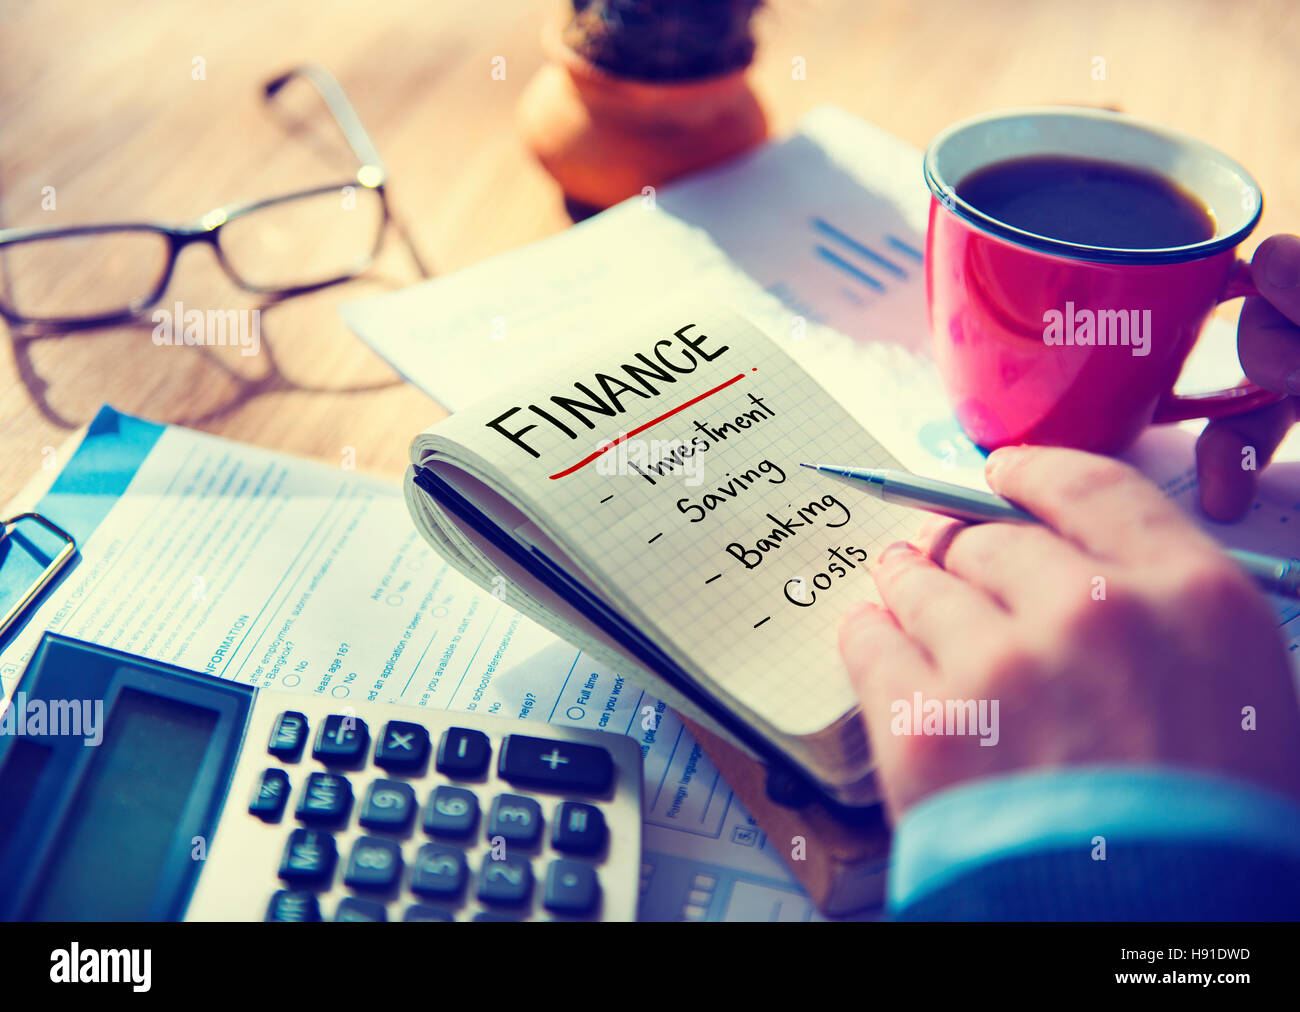 Finance Investment Banking Cost Concept Stock Photo